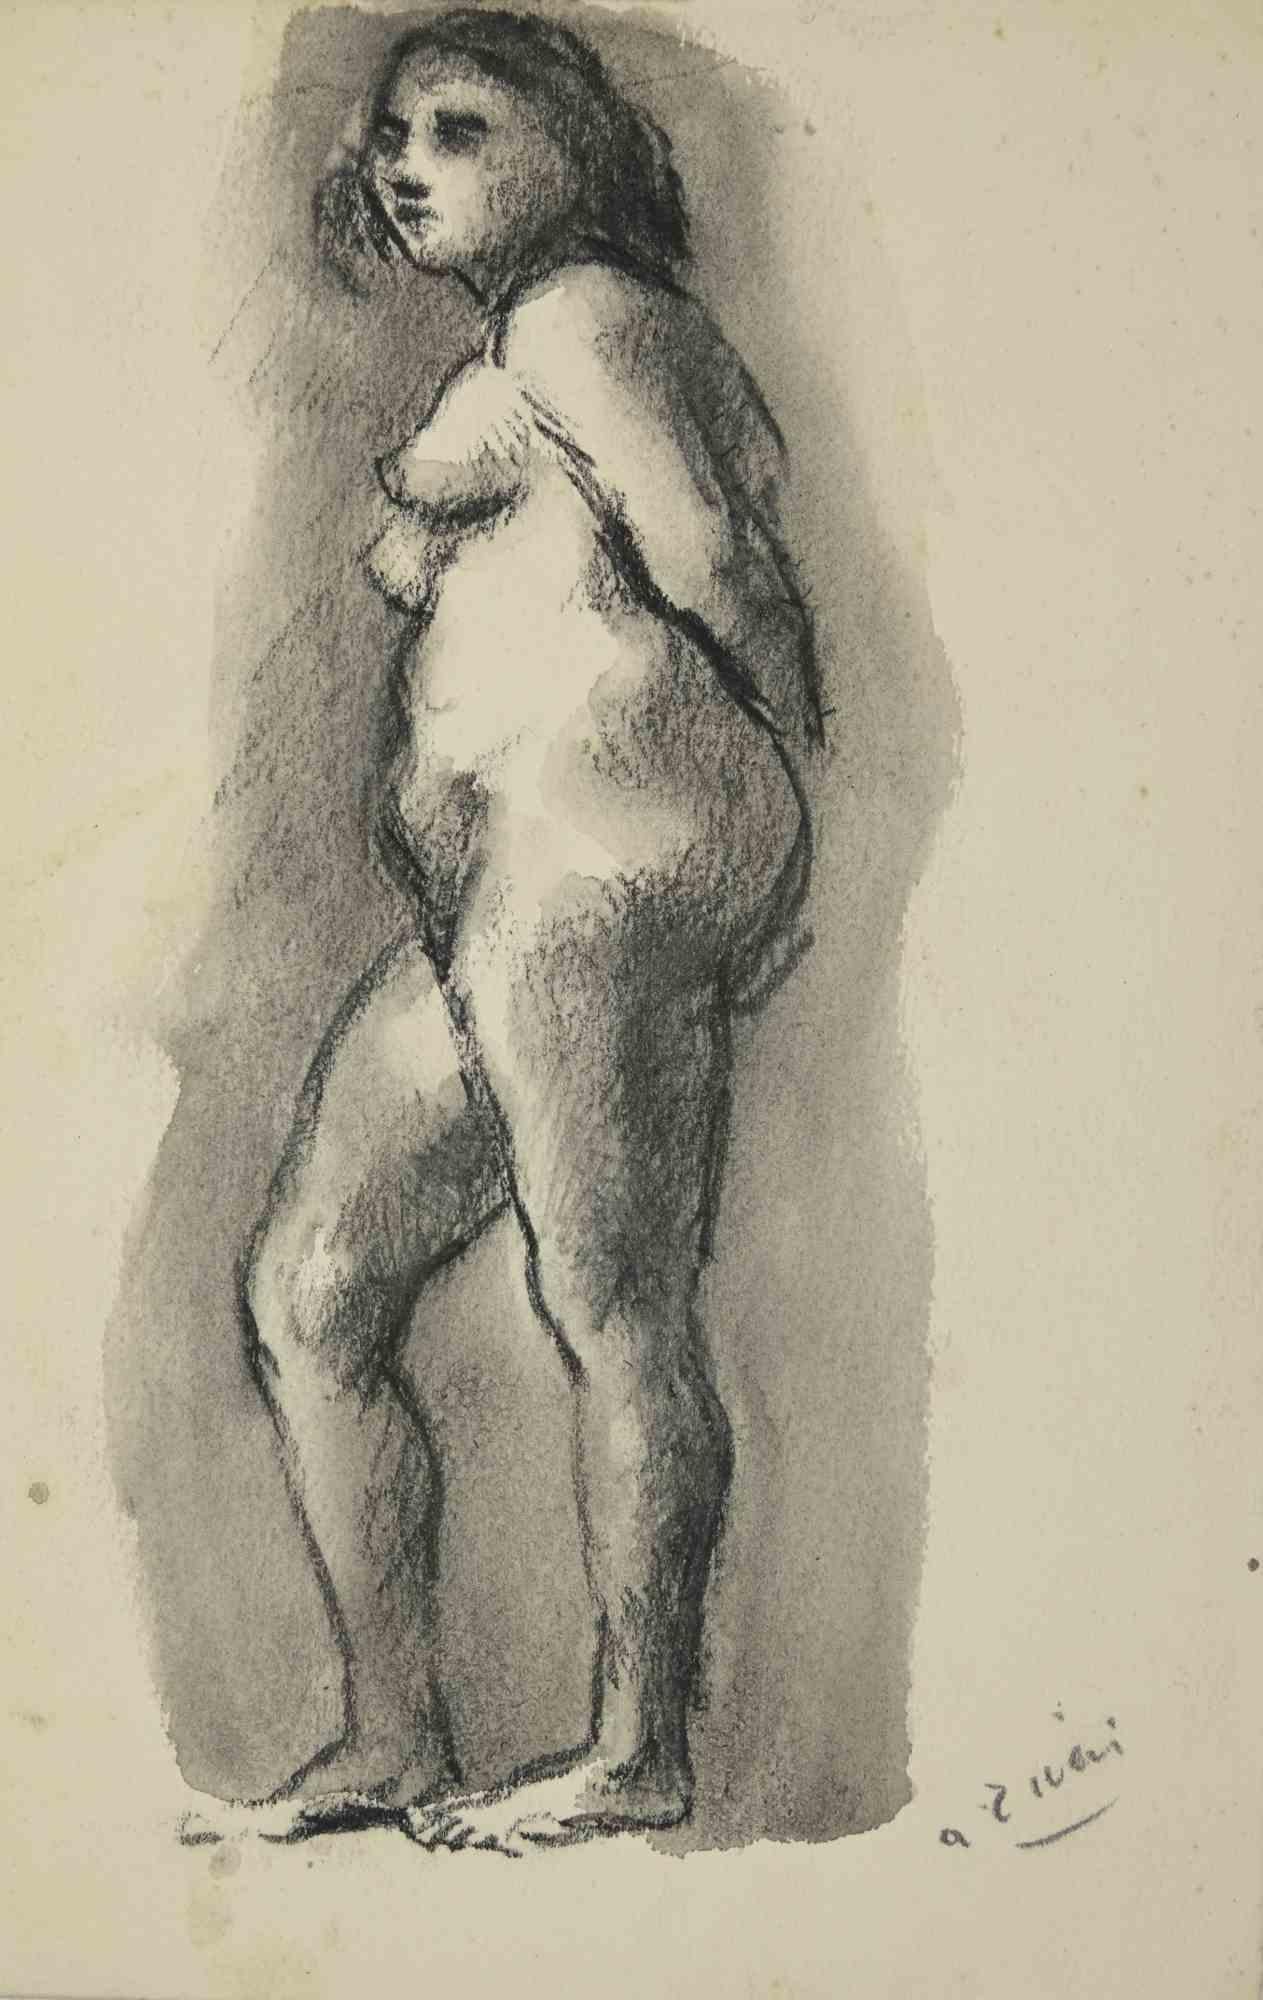 The Posing Nude is a drawing realized by Alberto Ziveri in 1930s

Charcoal and watercolor on paper

Hand-signed.

In good conditions. 

The artwork is represented through deft strokes masterly.

Alberto Ziveri (Rome,1908 – 1990), the Italian painter